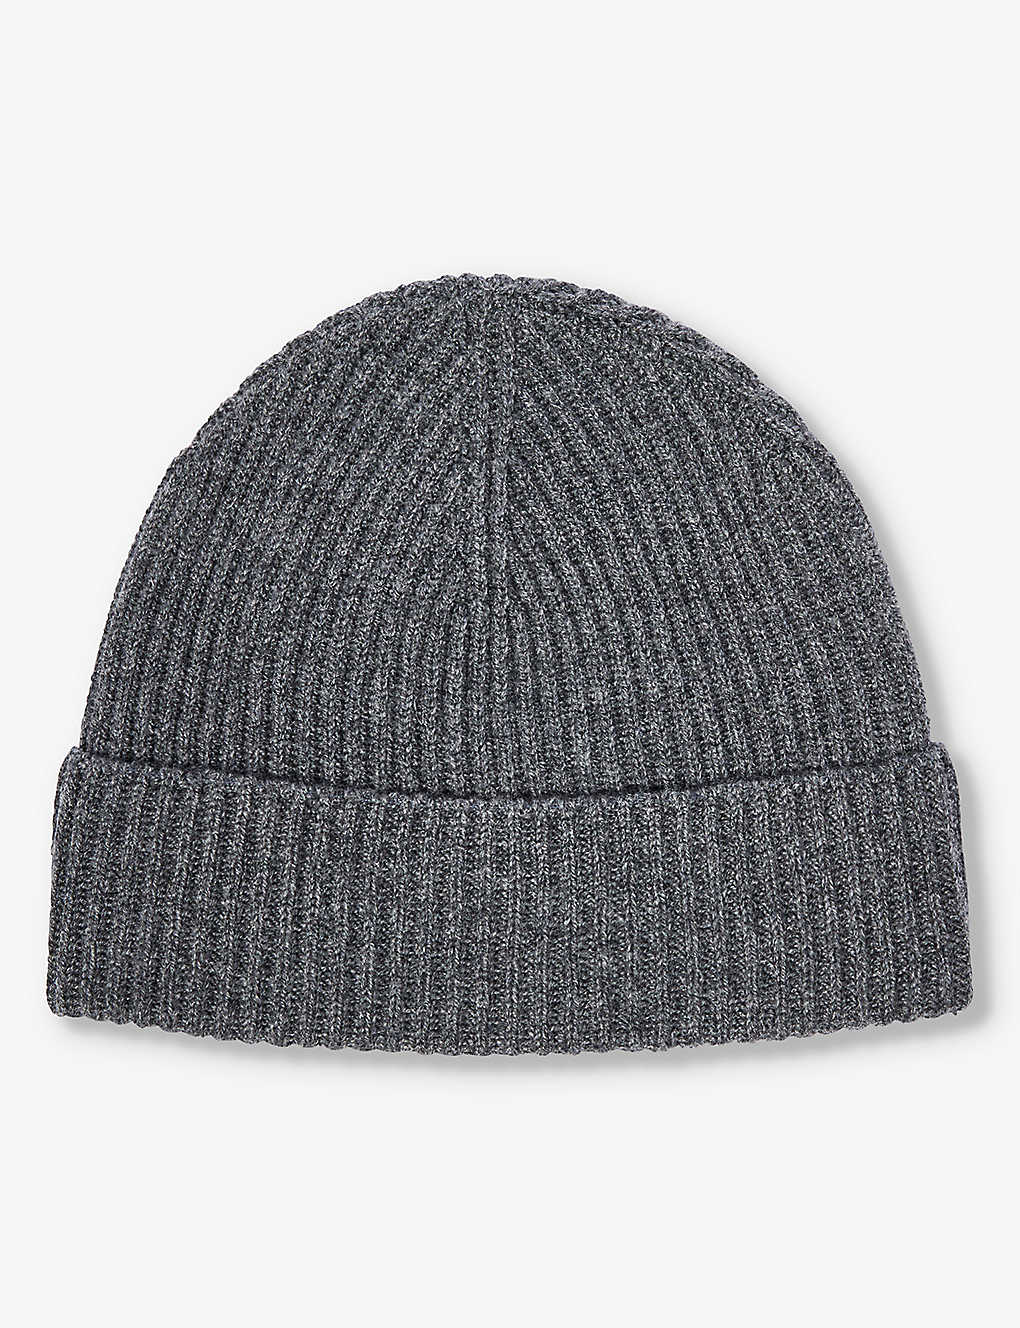 Johnstons Mens Sfa Mid Grey Ribbed-knit Folded-brim Cashmere Beanie Hat